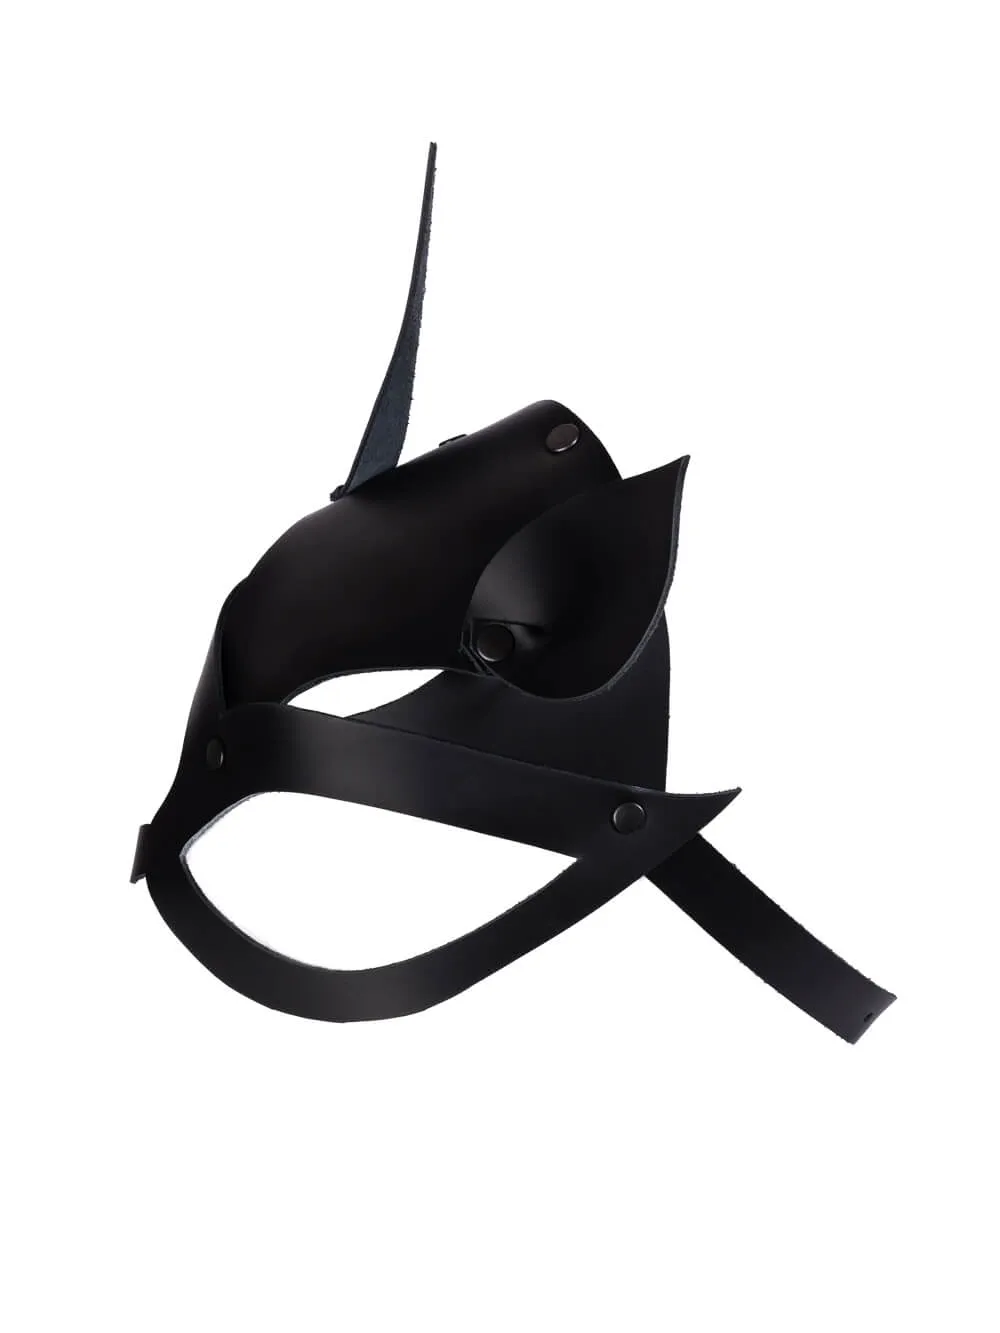 Handmade sexy leather cat mask. Kitten mask for Halloween party, night club, erotic and role playing games.